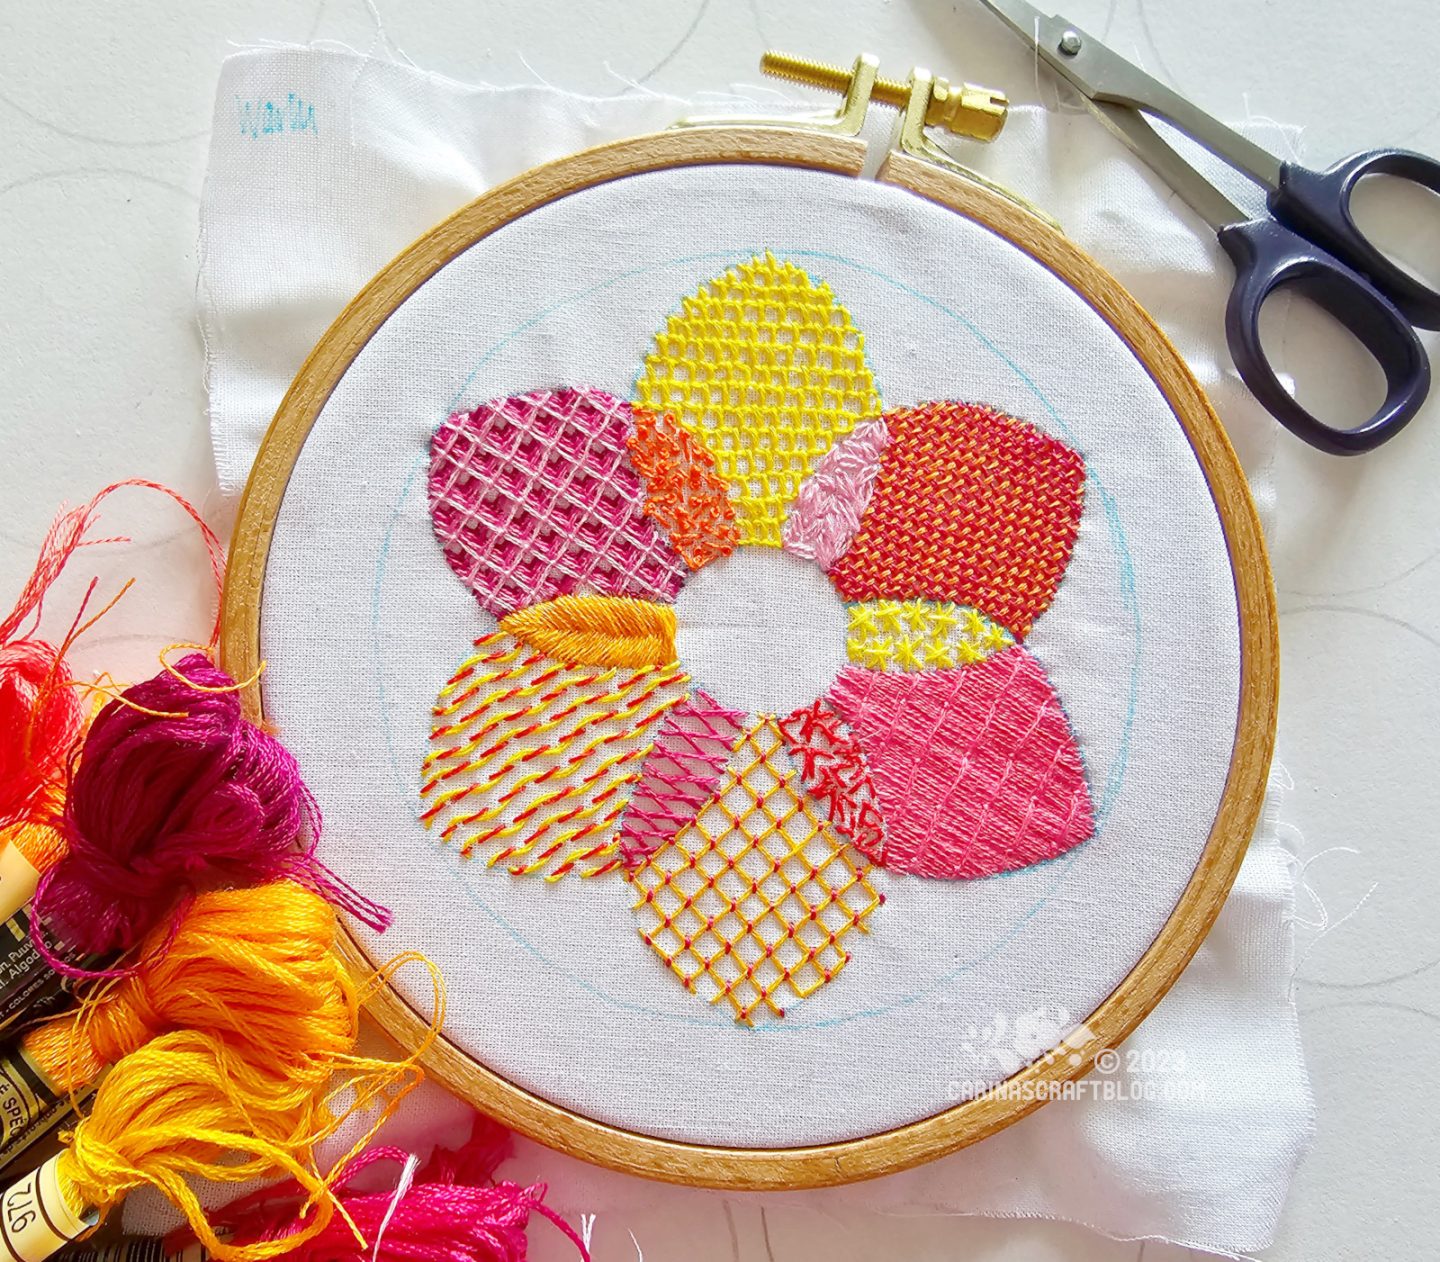 A wooden embroidery hoop with white fabric. On the fabric is embroidered a flower shaped design in warm colours using 12 different stitches.